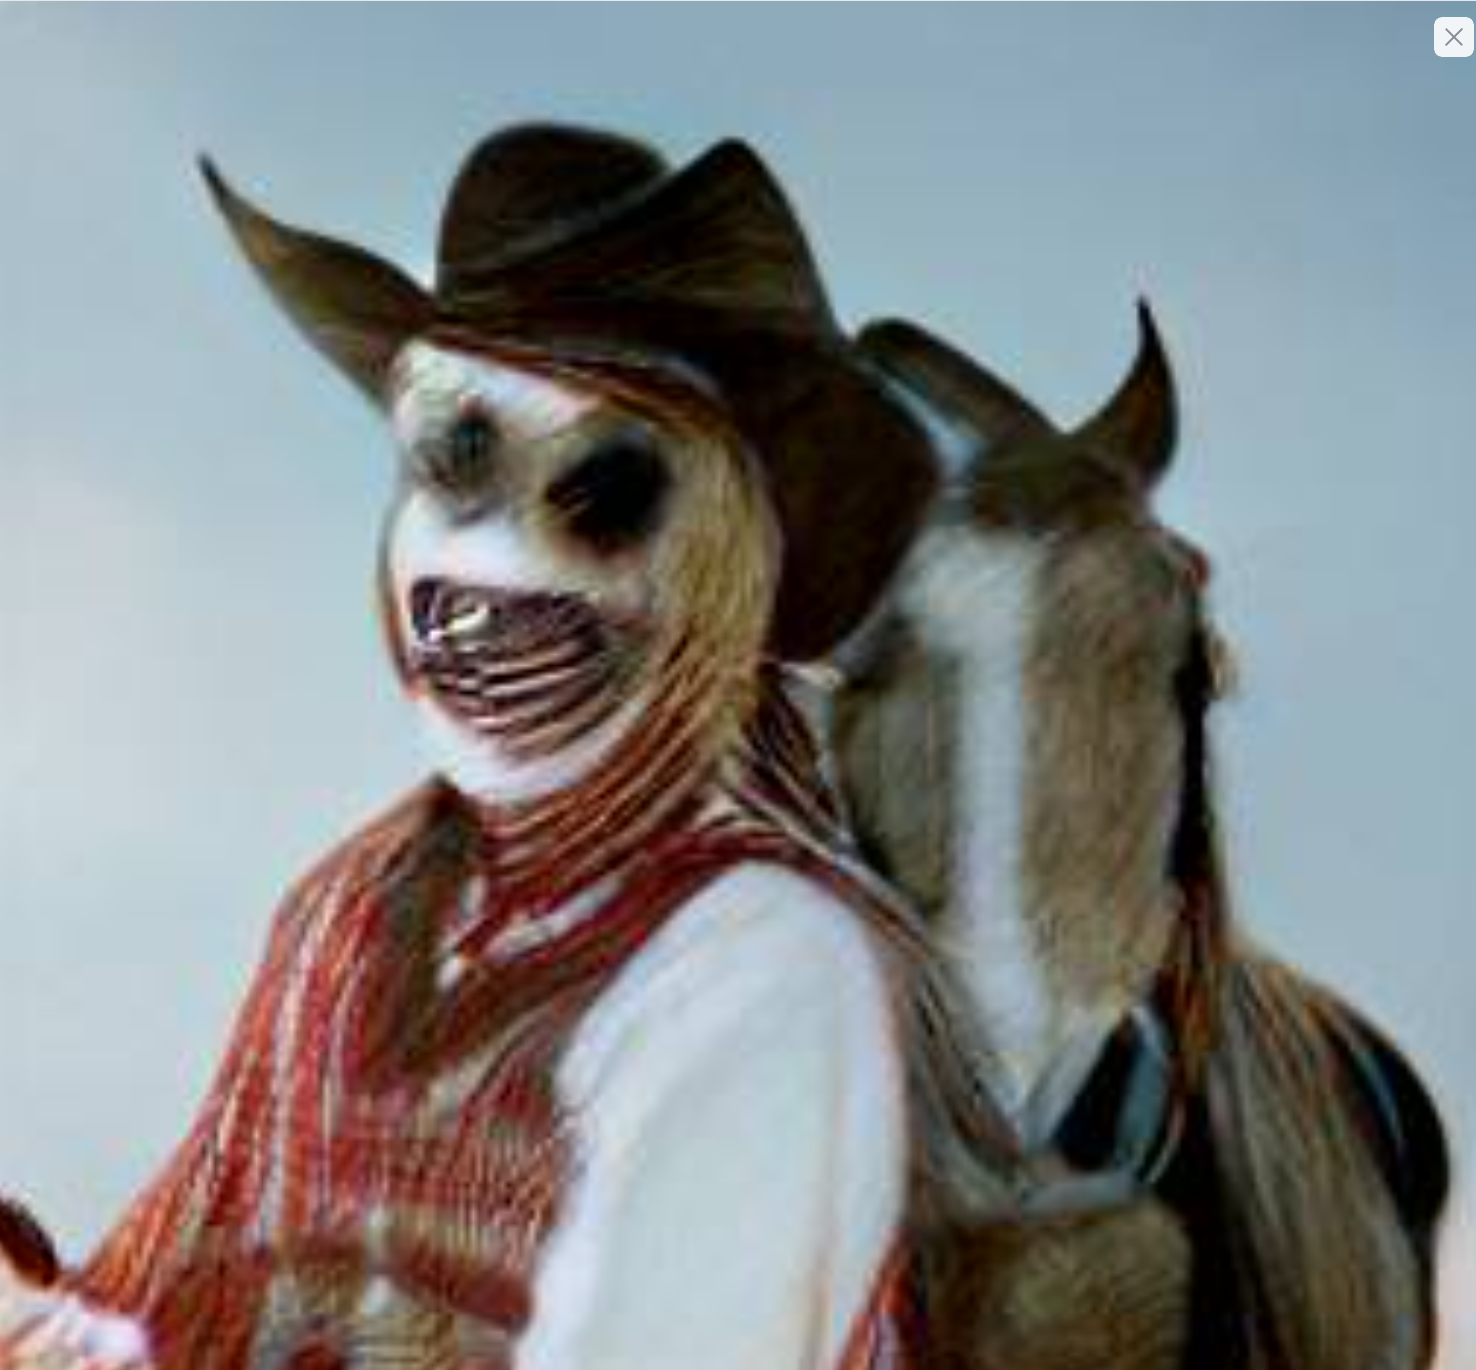 AI generated photo of a smiling cowboy that looks scary